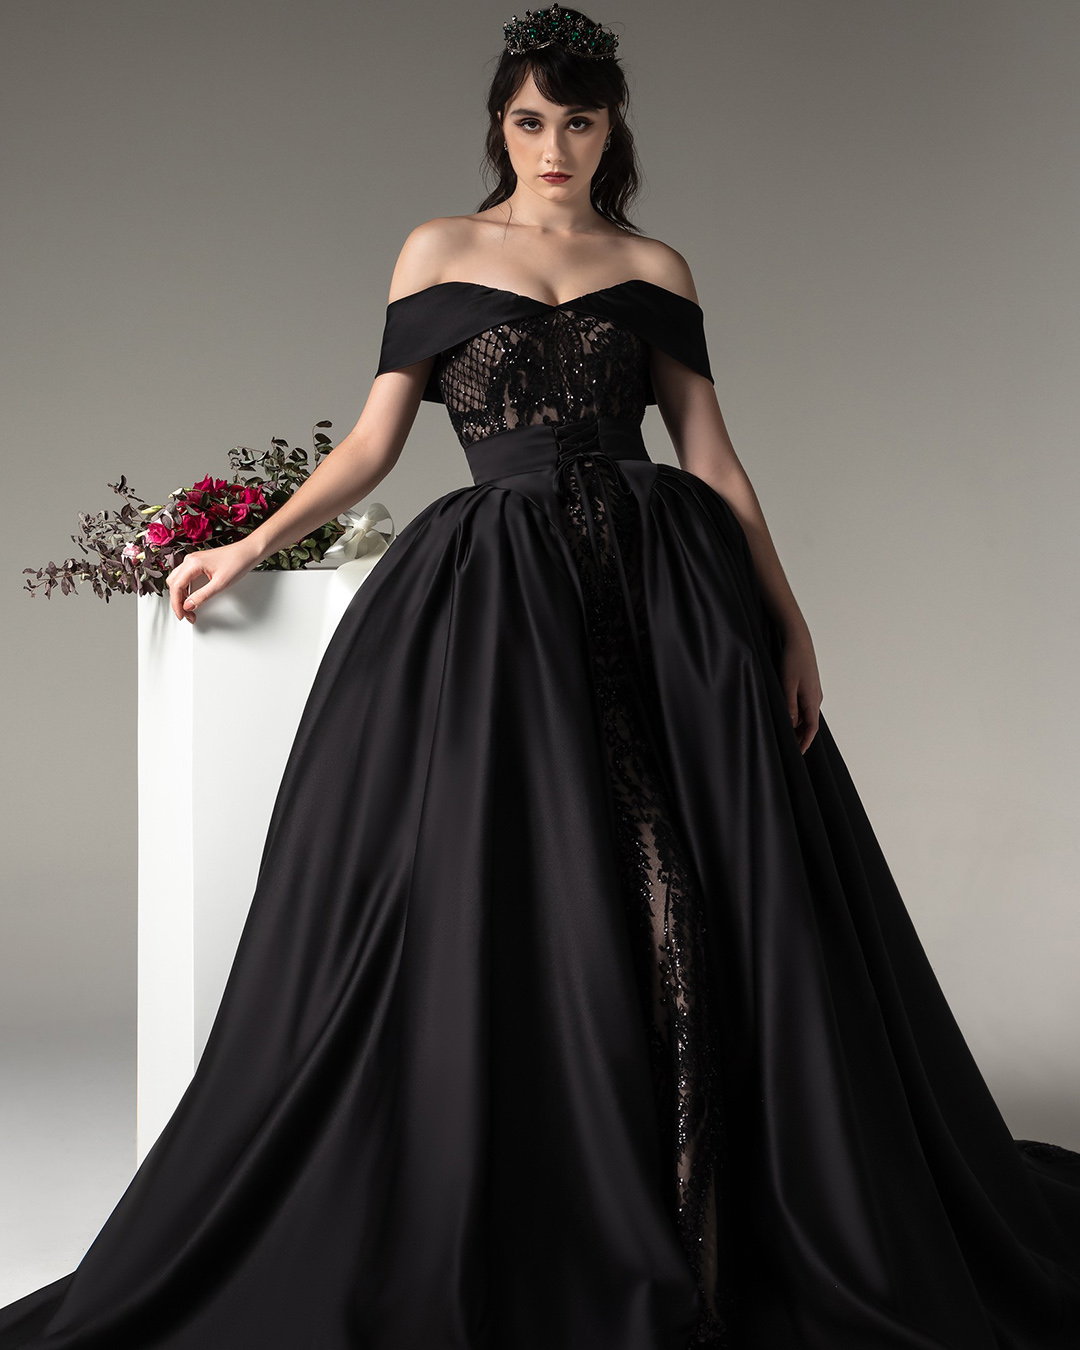 gothic wedding dresses ball gown strapless off the shoulder cocomelody